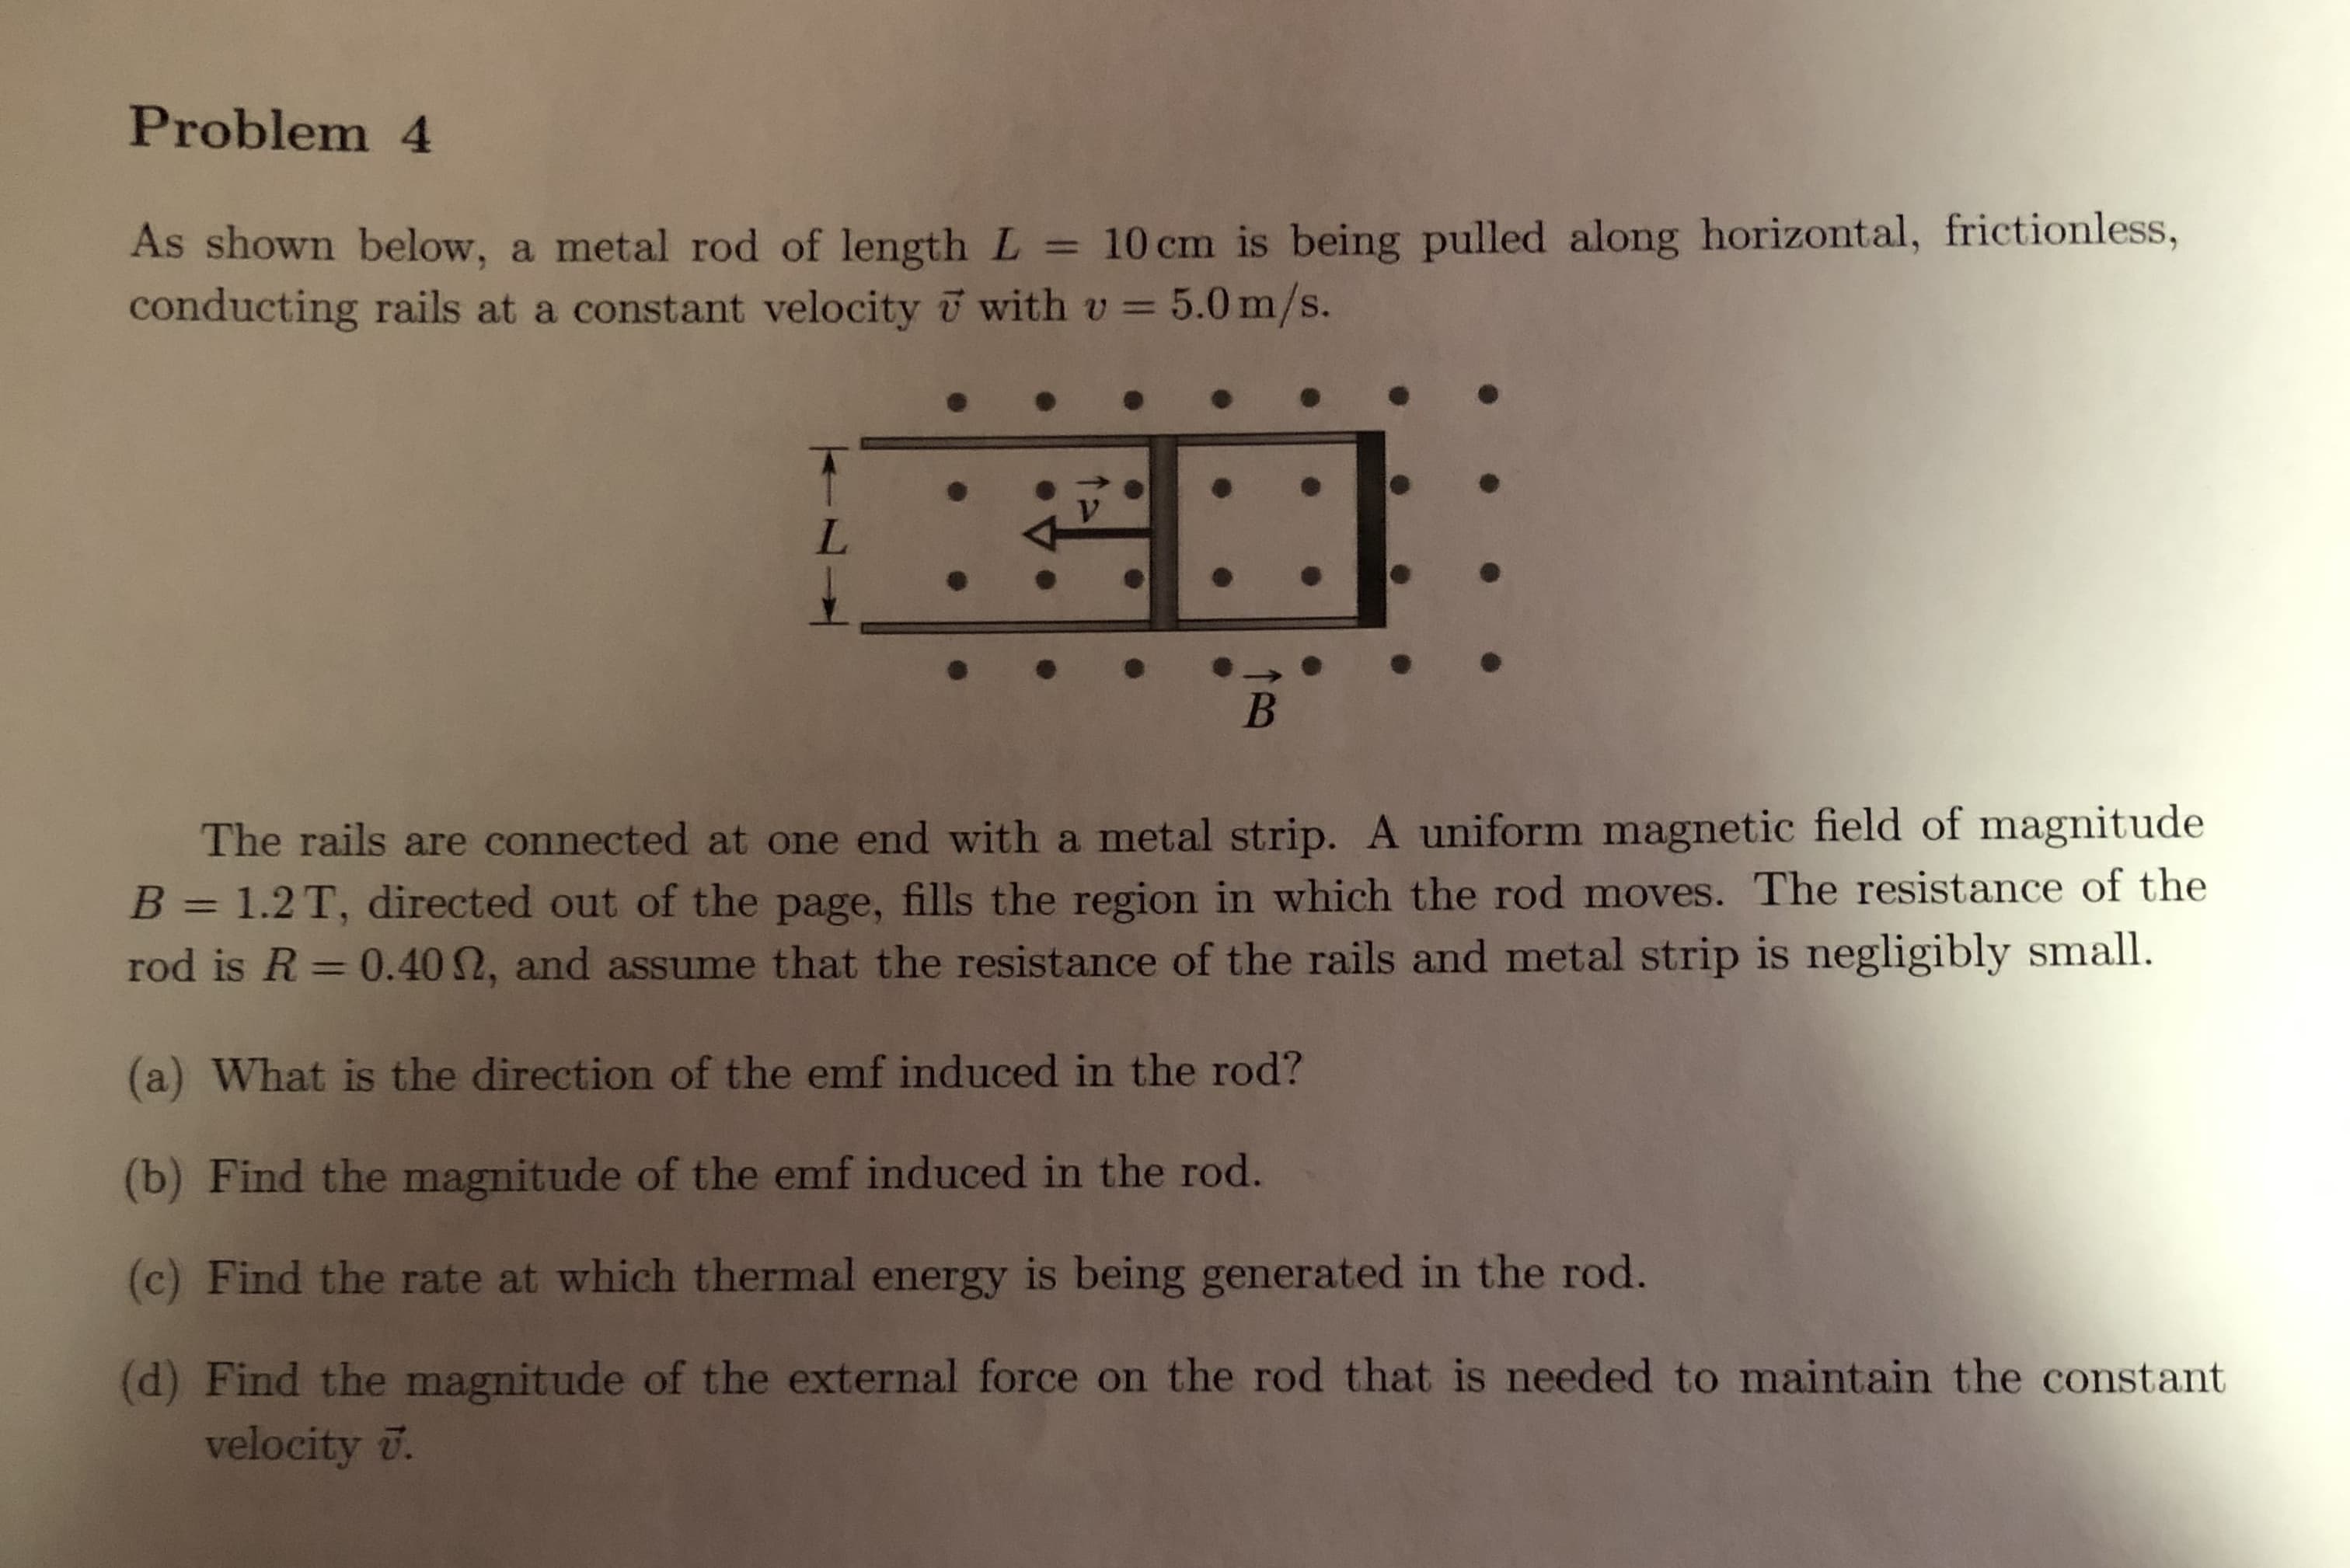 Problem 4
As shown below, a metal rod of length L 10cm is being pulled along horizontal, frictionless,
conducting rails at a constant velocity with v-5.0 m/s.
The rails are connected at one end with a metal strip. A uniform magnetic field of magnitude
B 1.2T, directed out of the page, fills the region in which the rod moves. The resistance of the
rod is R-0.4012, and assume that the resistance of the rails and metal strip is negligibly small.
(a) What is the direction of the emf induced in the rod?
(b) Find the magnitude of the emf induced in the rod.
(c) Find the rate at which thermal energy is being generated in the rod.
(d) Find the magnitude of the external force on the rod that is needed to maintain the constant
velocity .
